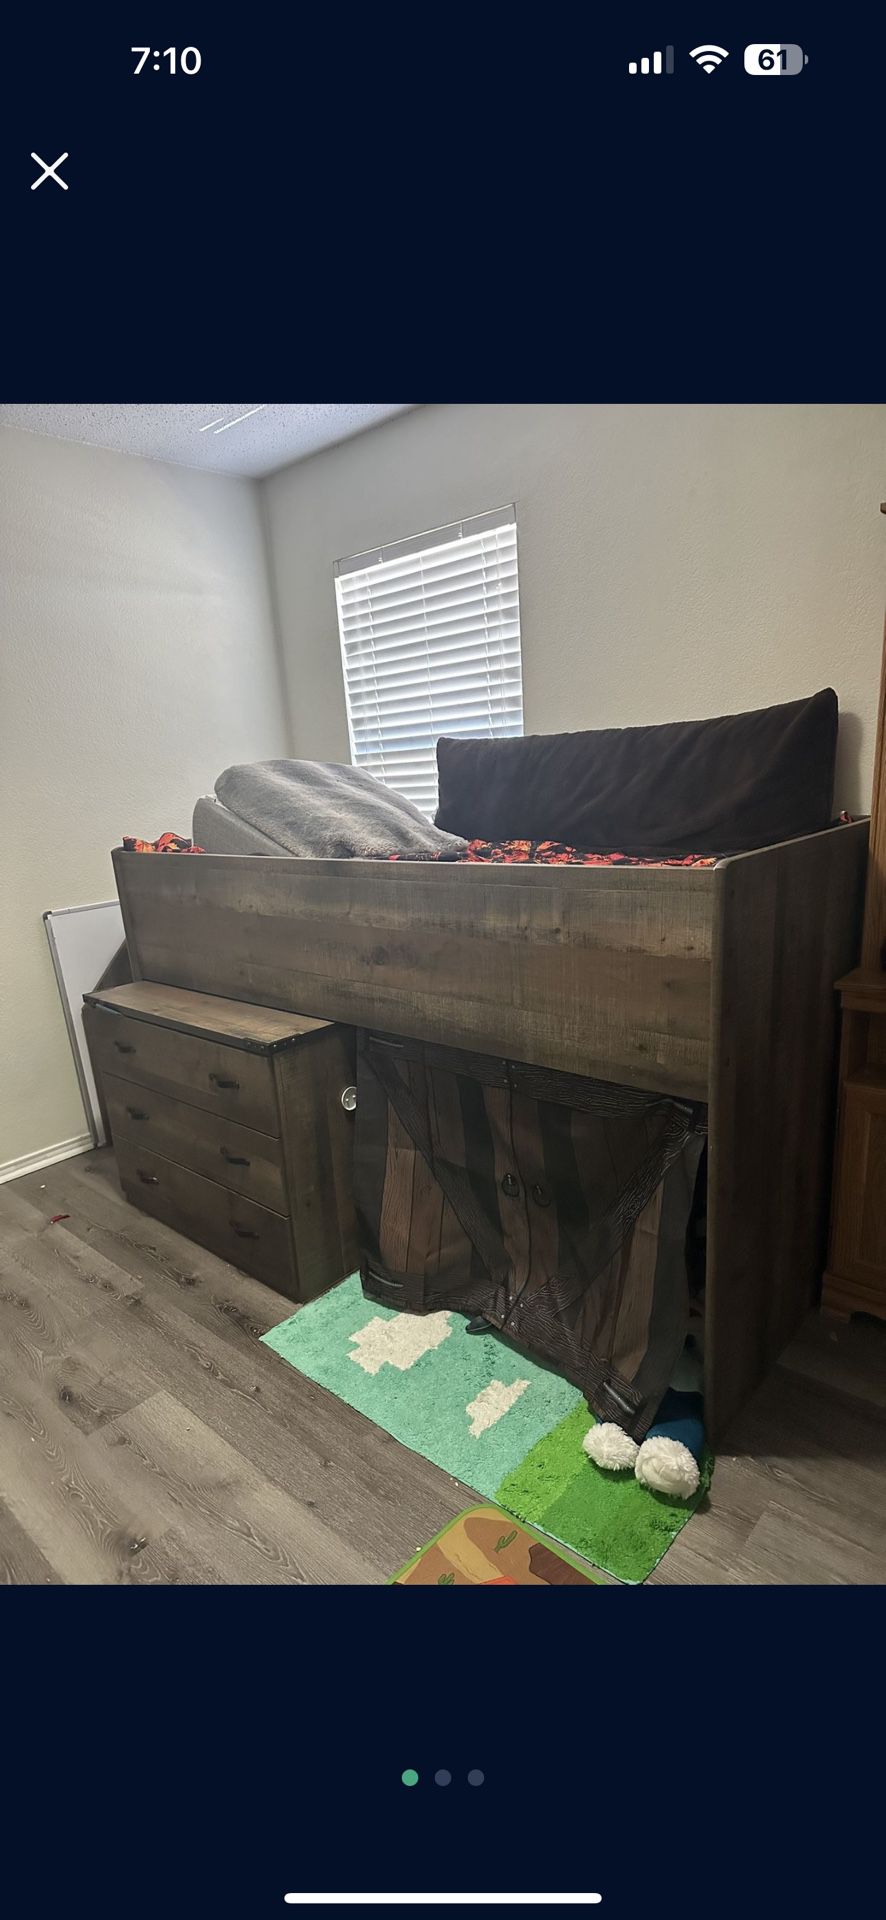 Twin Bed With Storage 